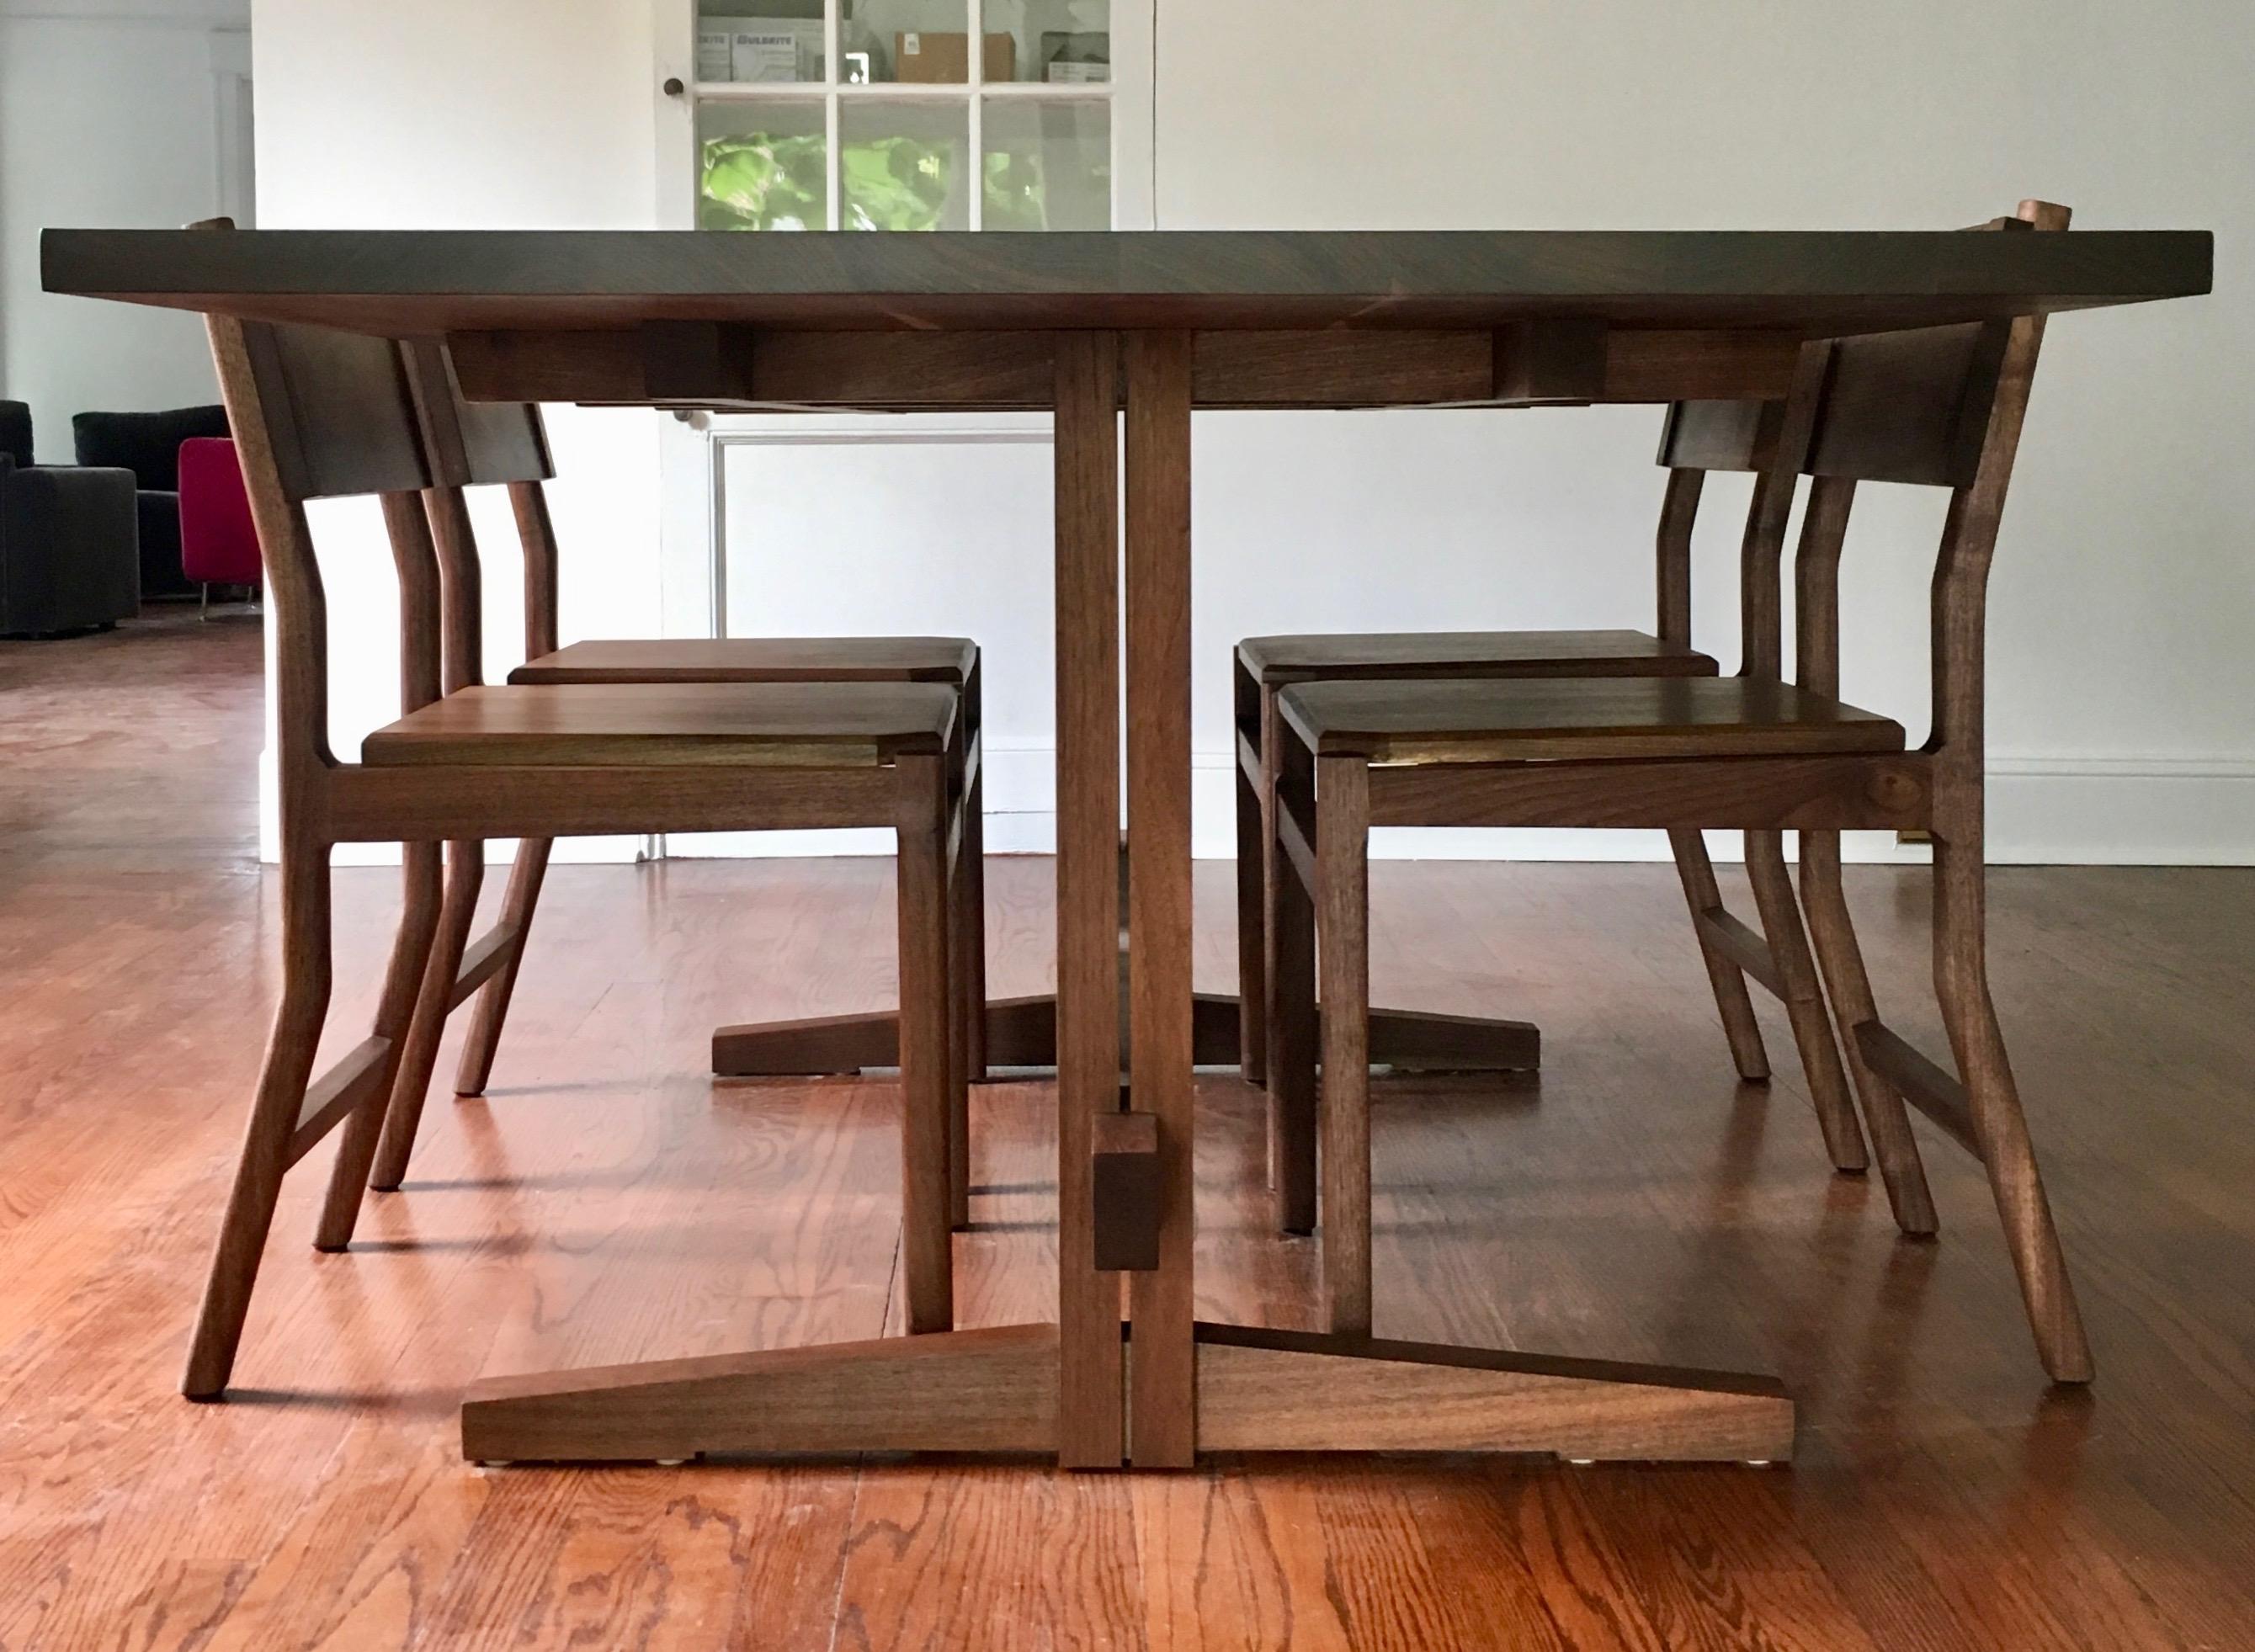 American Black Walnut Hewitt Wood Dining Chair by New York Heartwoods For Sale